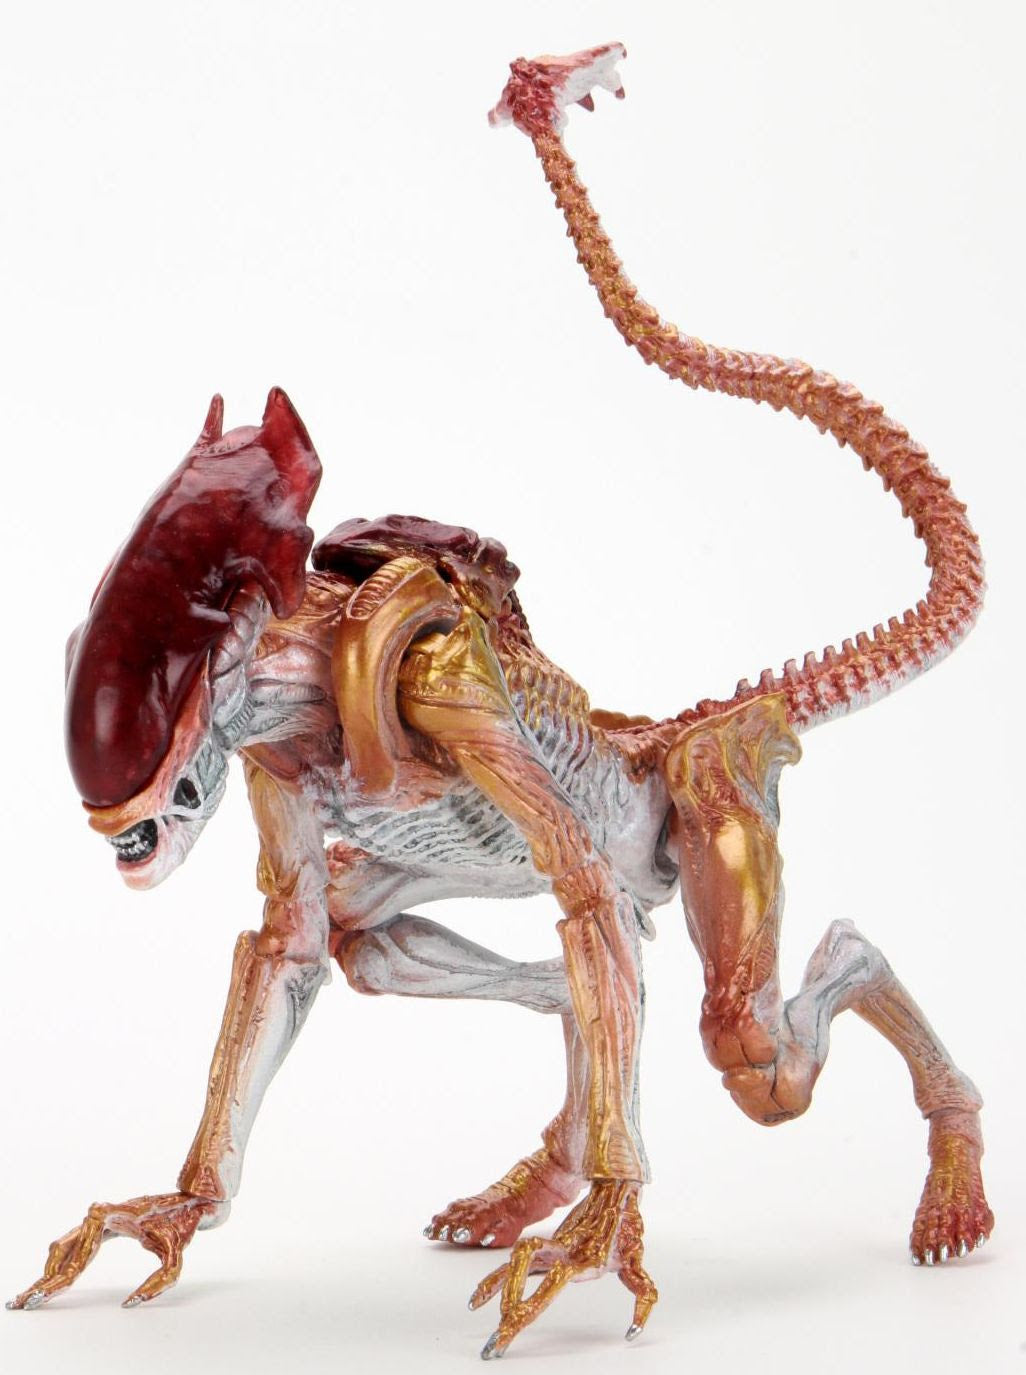 NECA - Aliens - 7" Scale Action Figure - Kenner Tribute Panther Alien